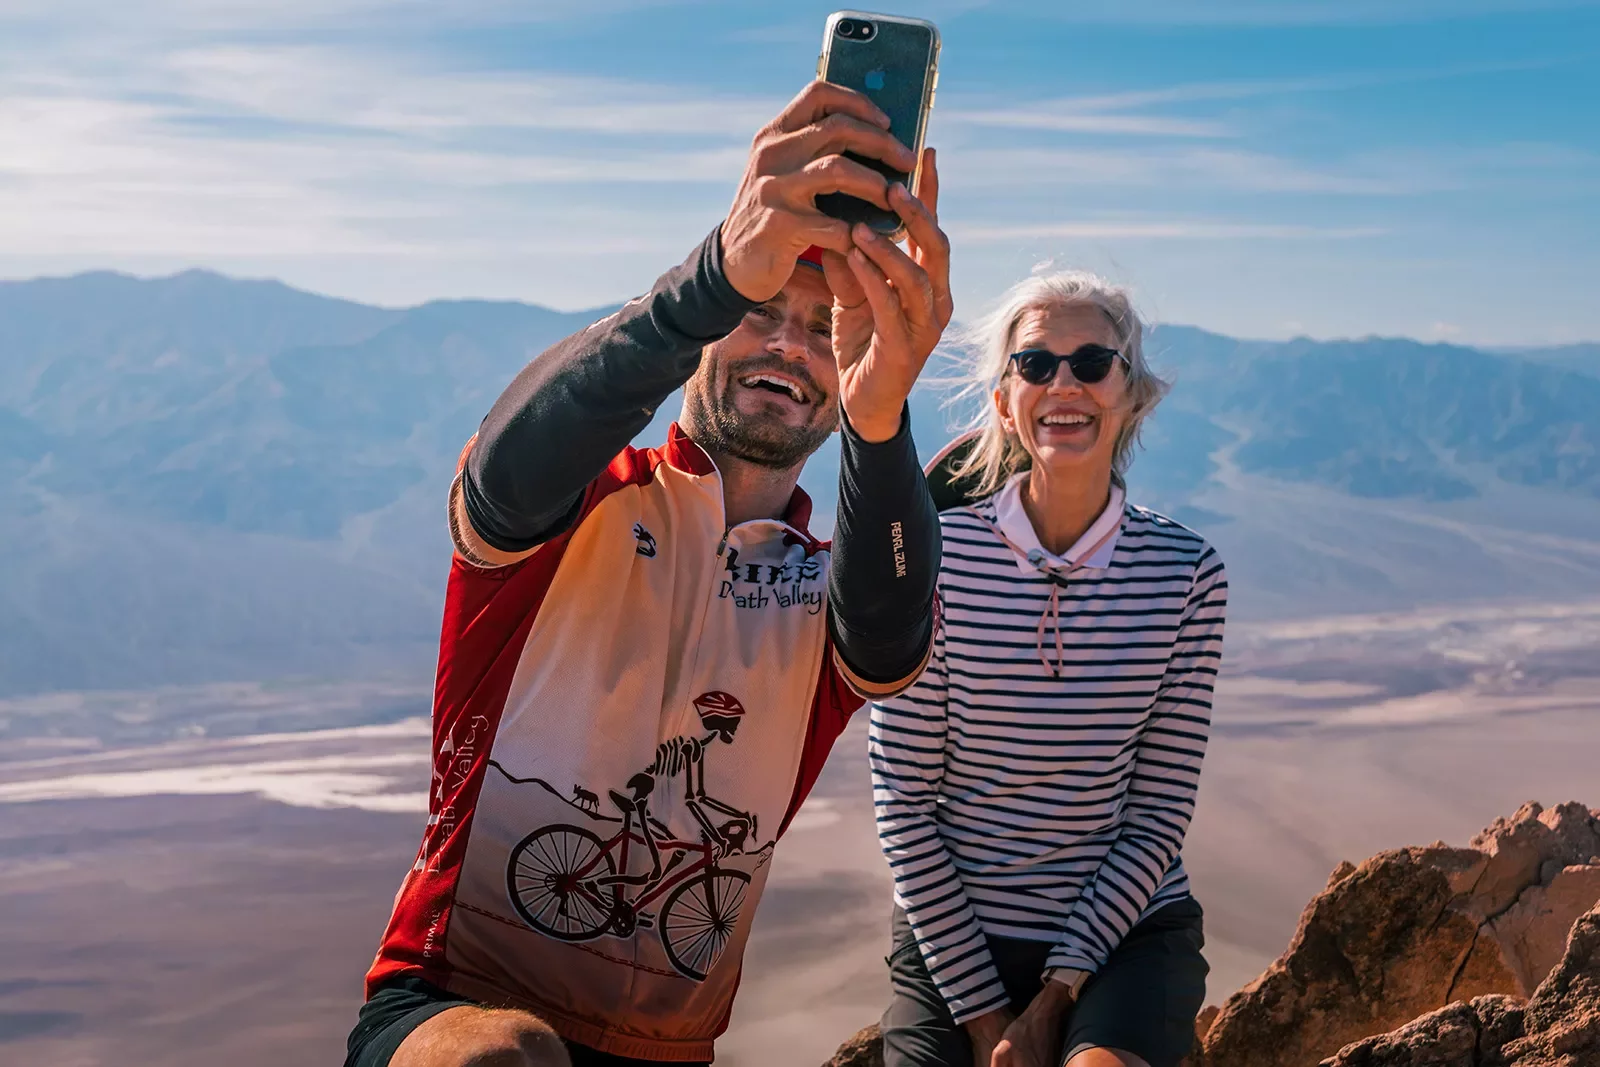 Cyclists taking selfie in California